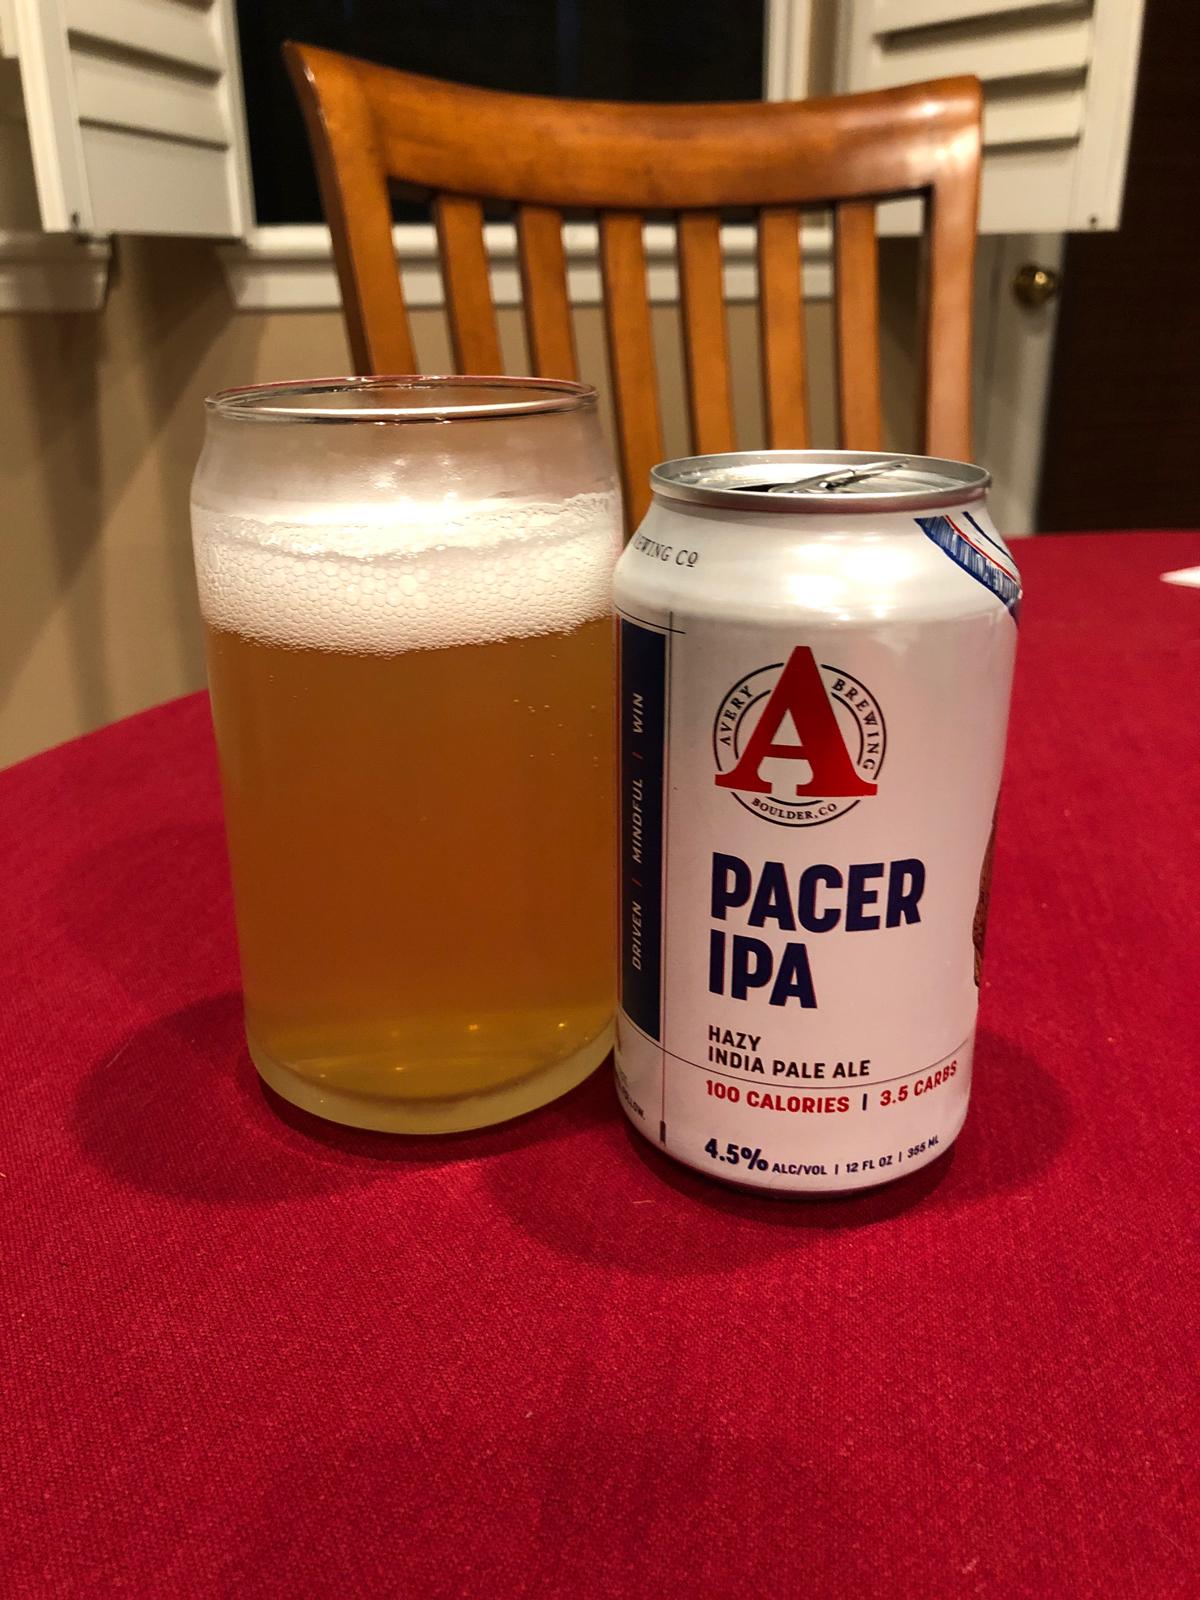 Pacer IPA